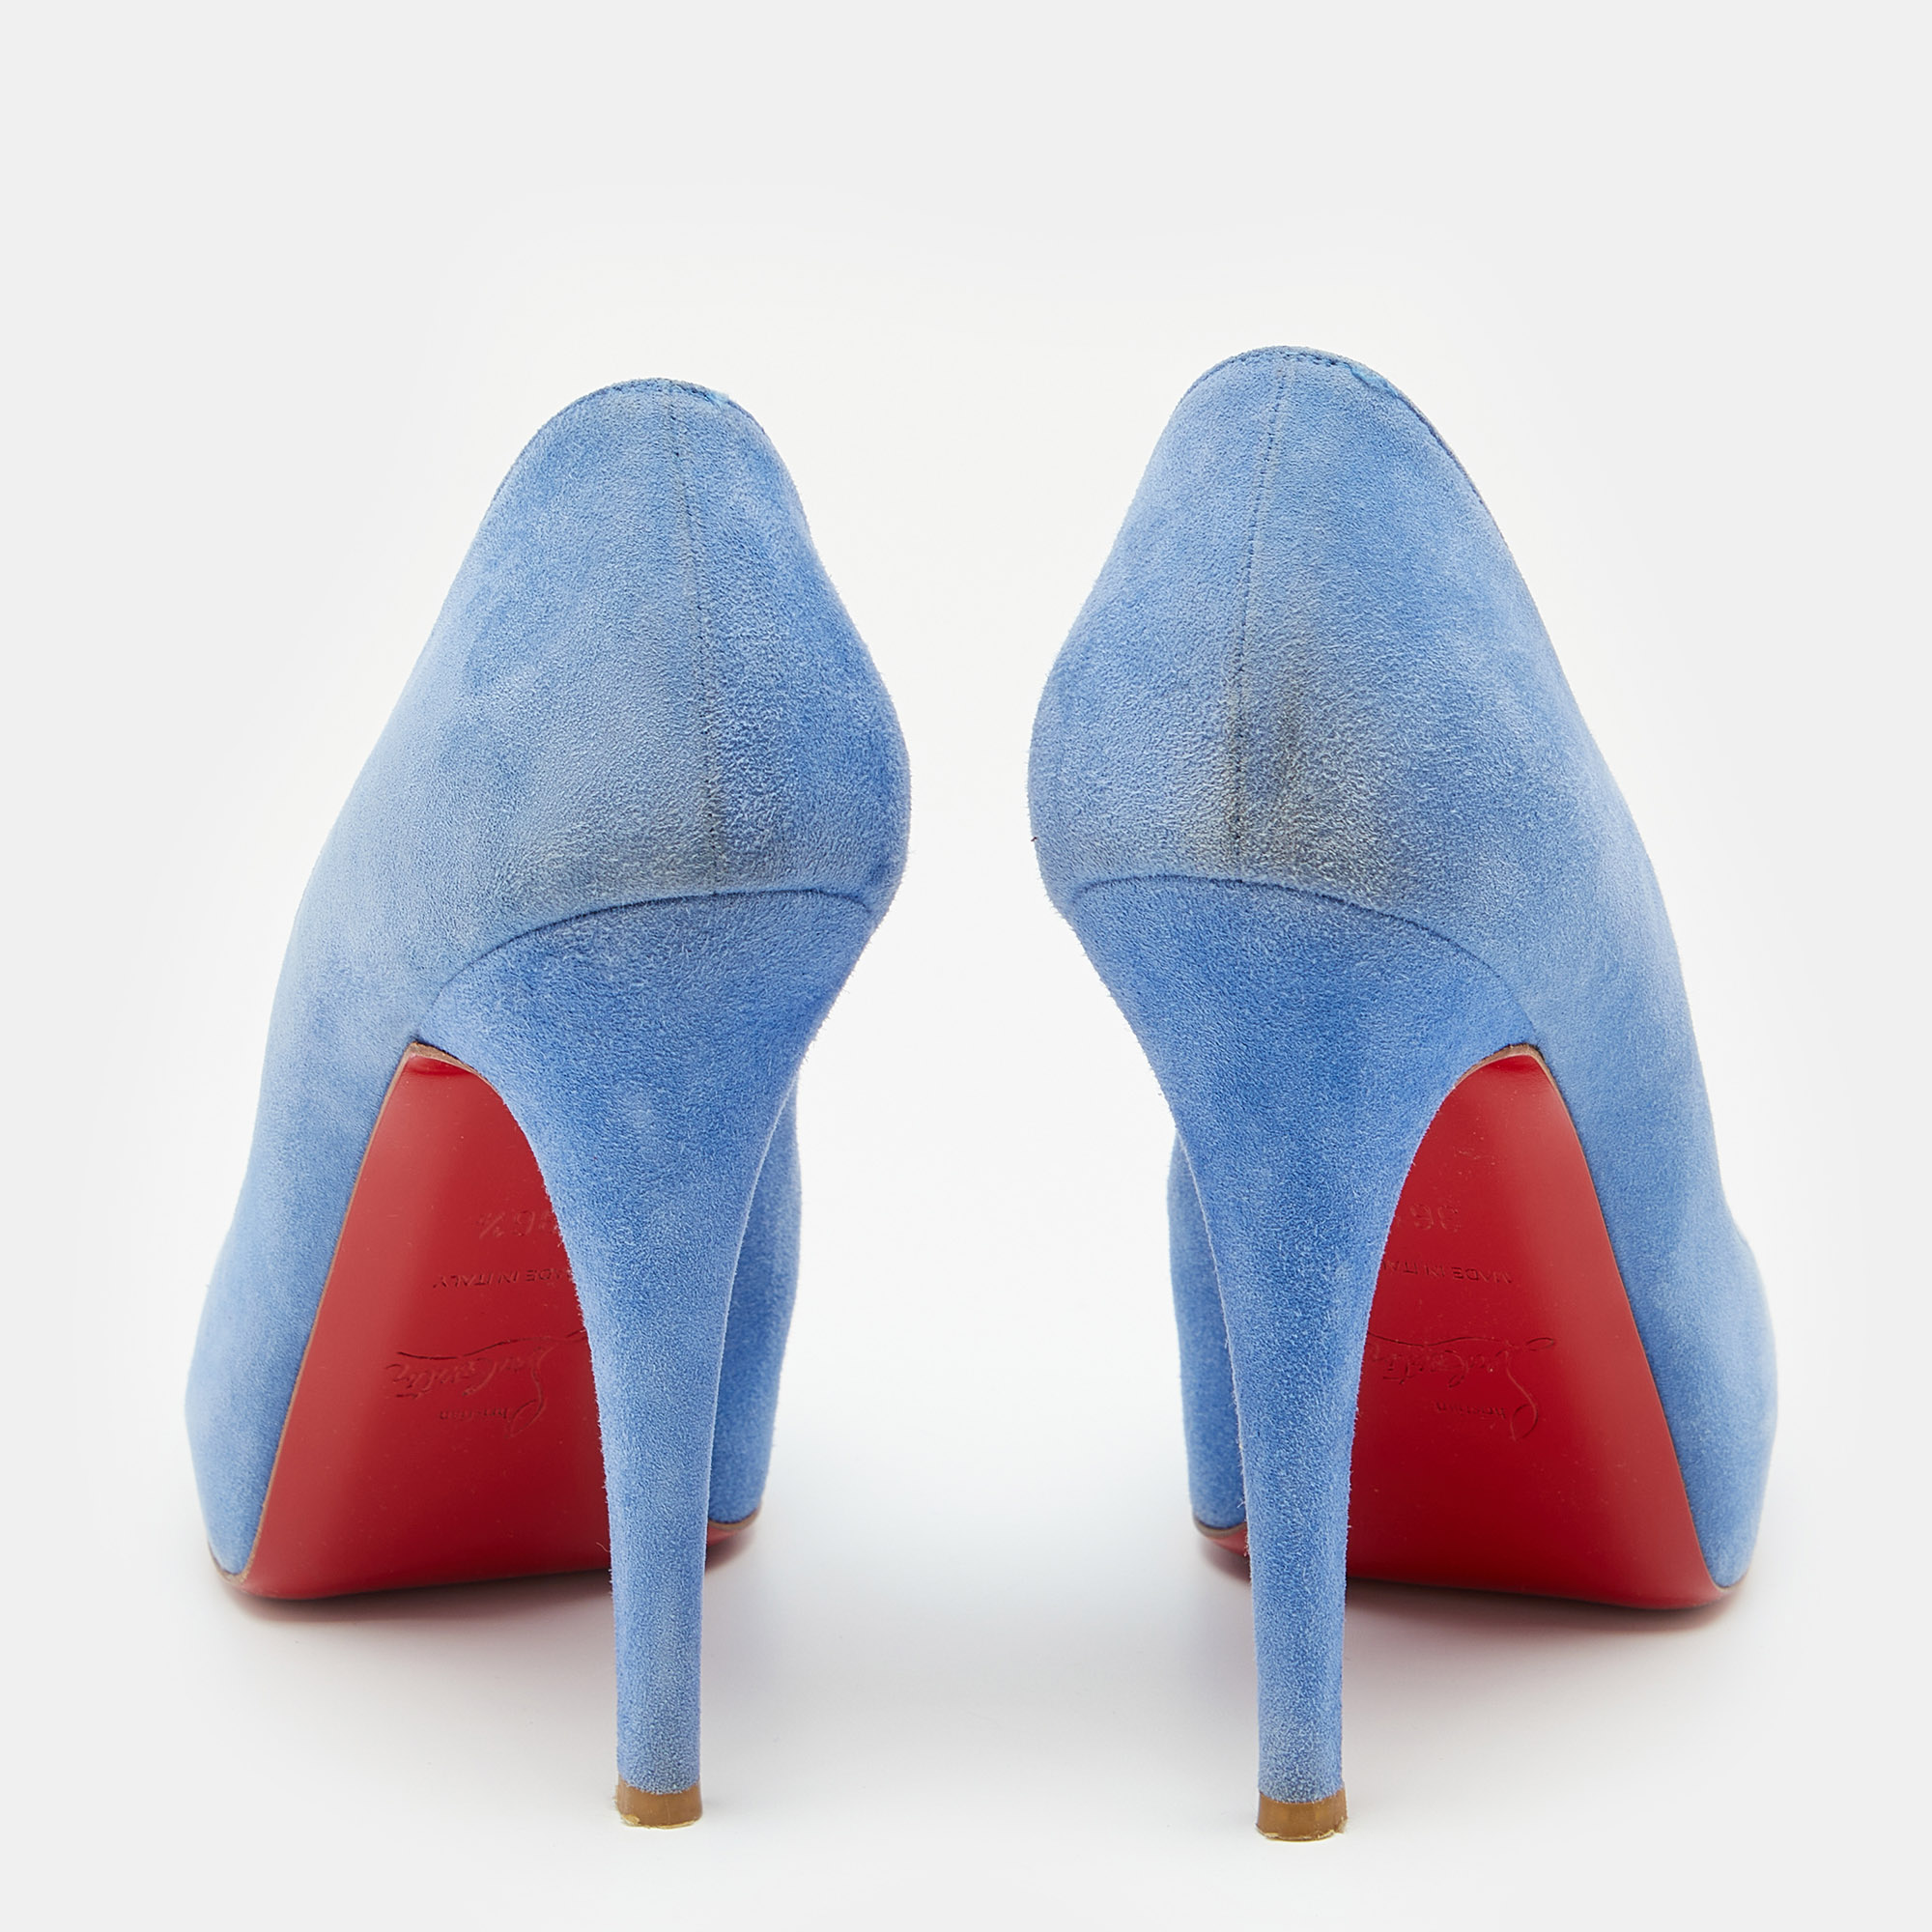 Christian Louboutin Blue Suede New Very Prive Peep Toe Pumps Size 36.5